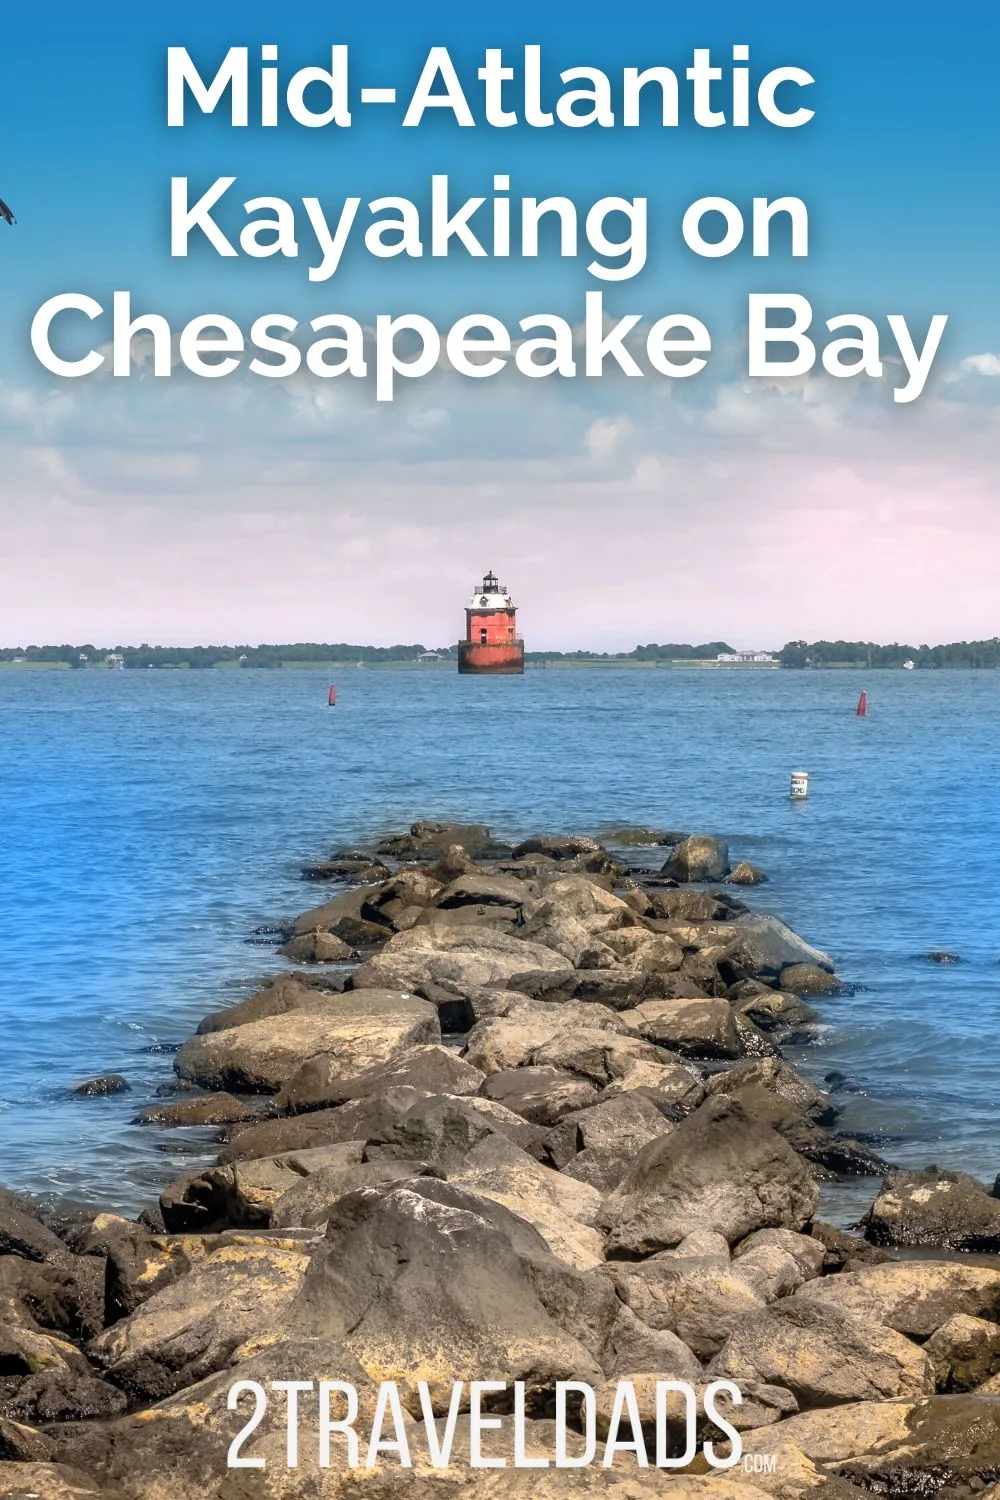 Kayaking on Chesapeake Bay means paddling the water trails of Capt John Smith and in the crabbing region of the Mid-Atlantic. See where to launch, paddling trails and tours for Chesapeake Bay adventures!